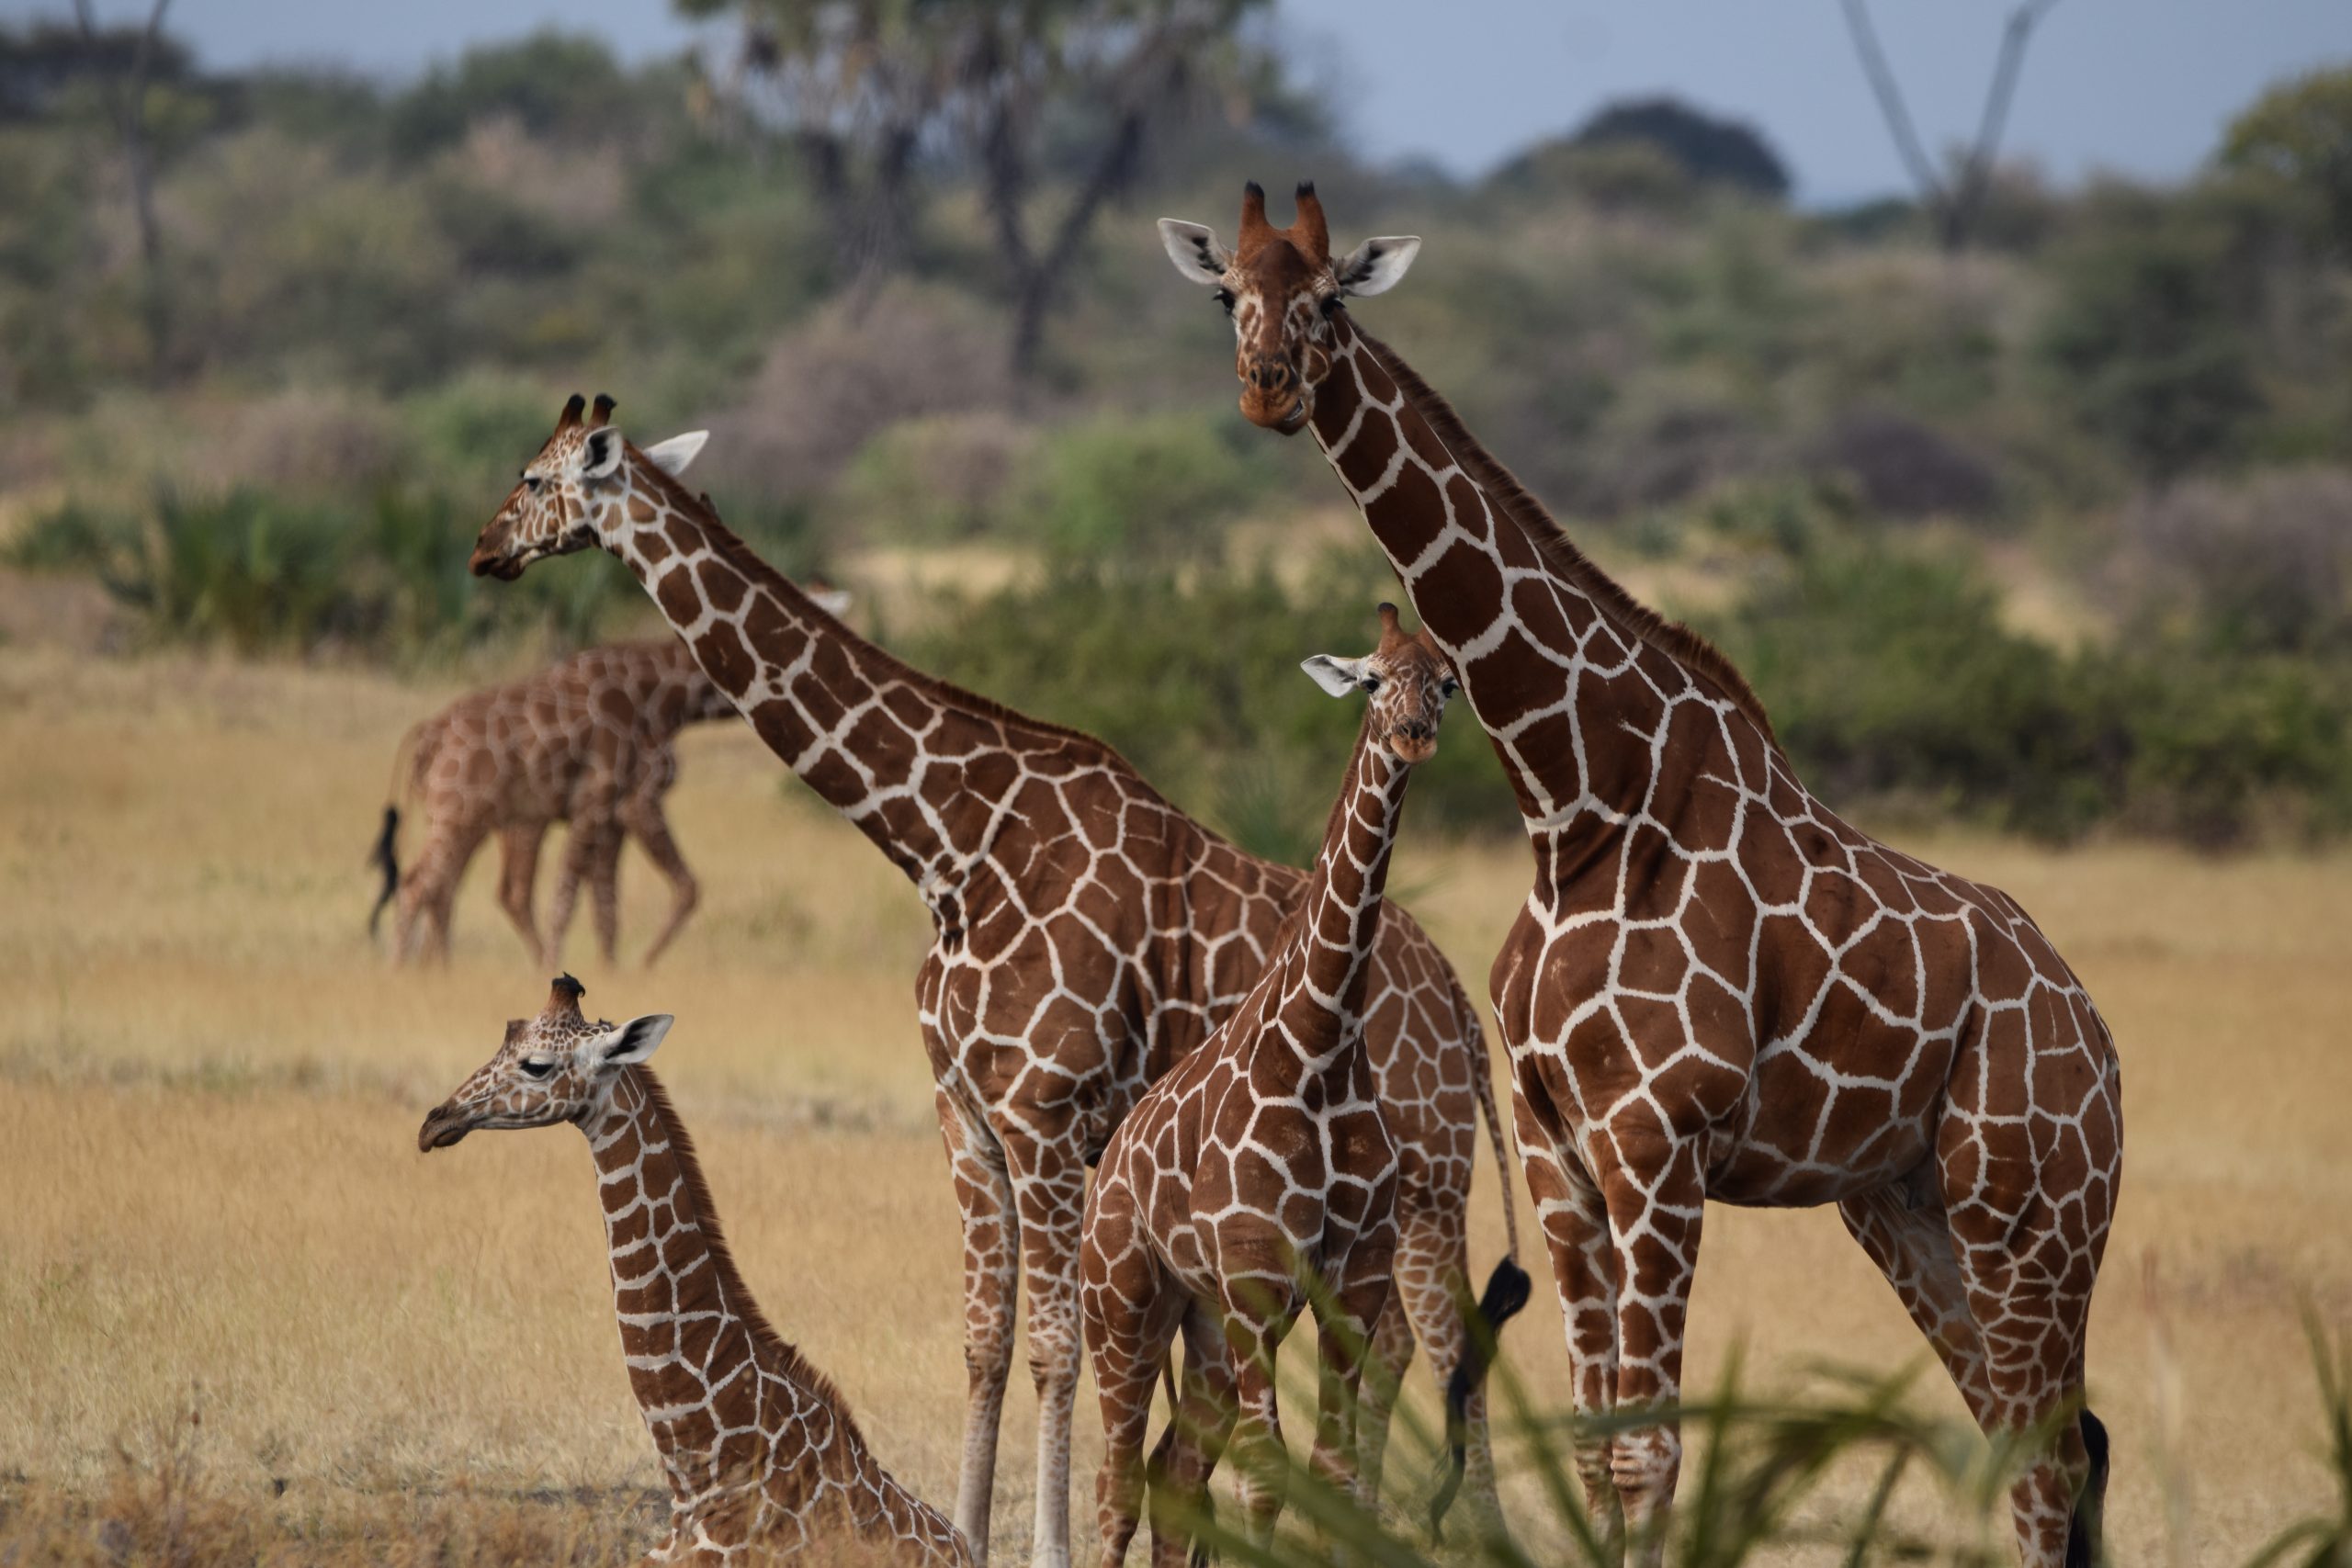 A group of wild giraffes, standing together on grassland